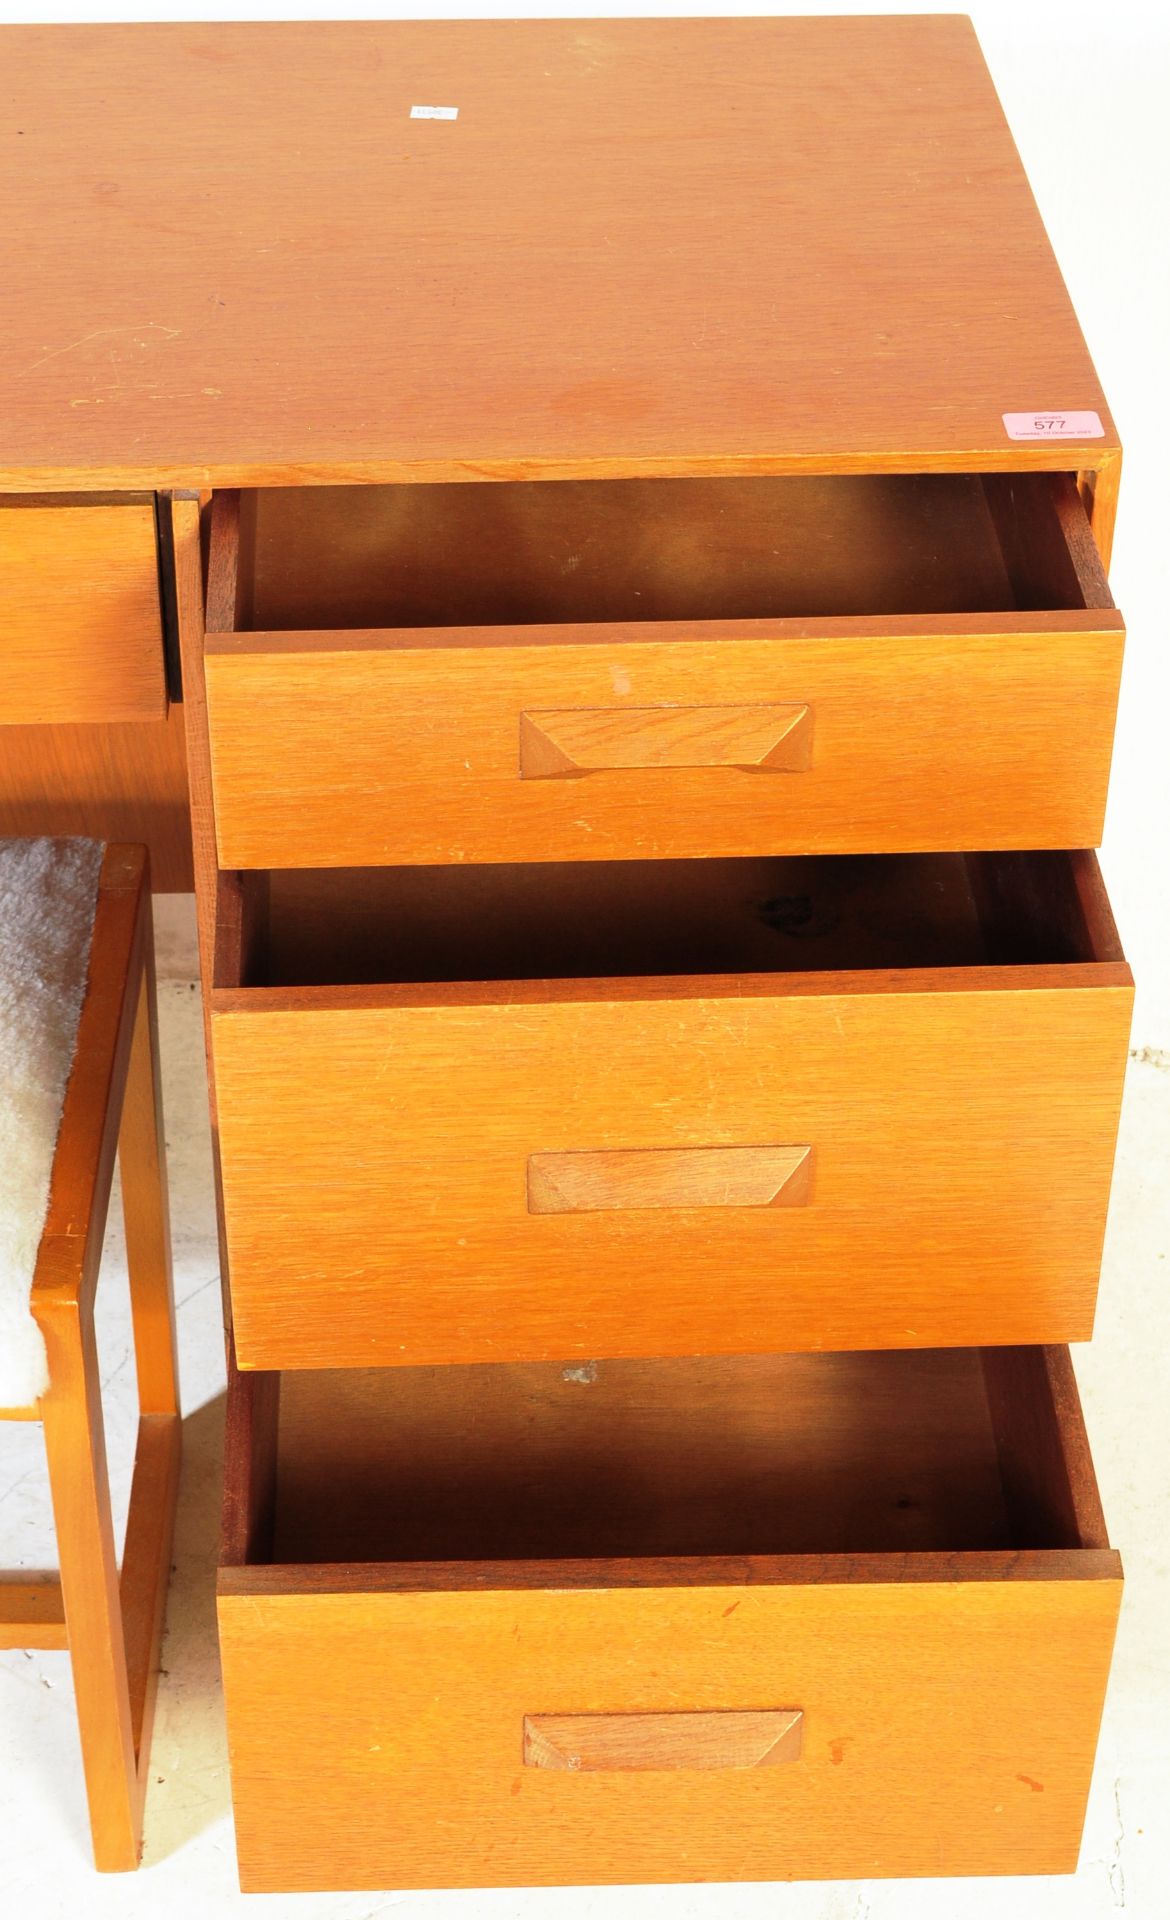 MID 20TH CENTURY OAK STAG FURNITURE DRESSING TABLE - Image 6 of 9